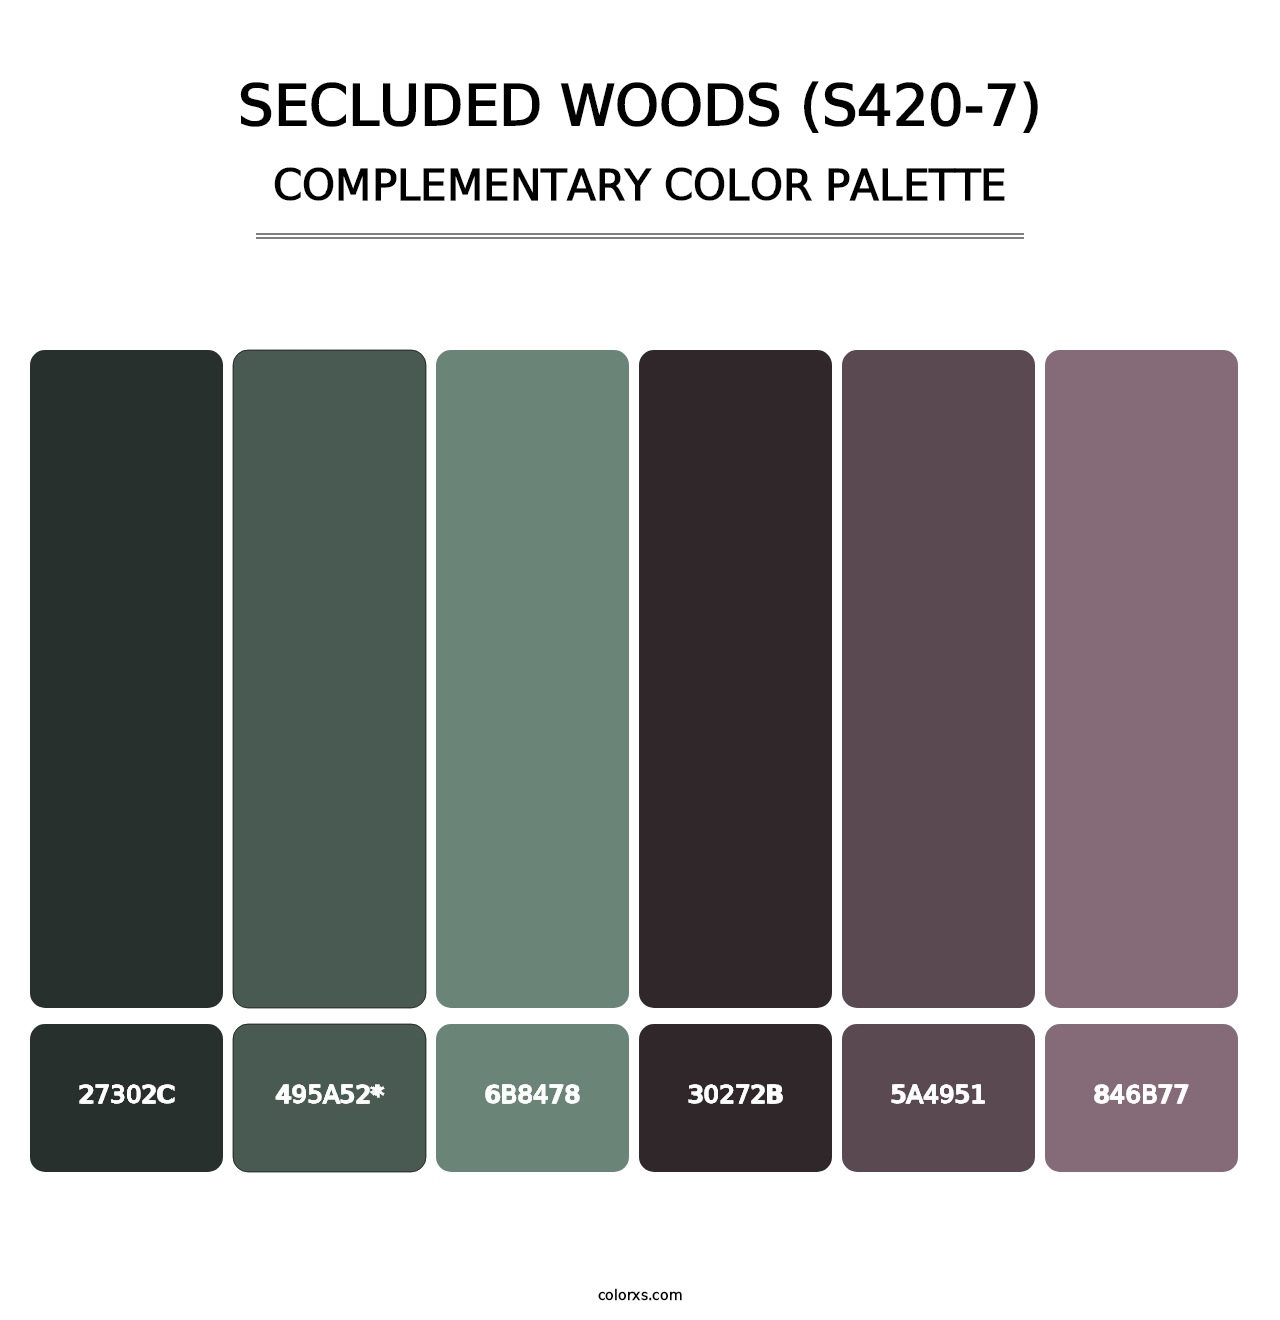 Secluded Woods (S420-7) - Complementary Color Palette